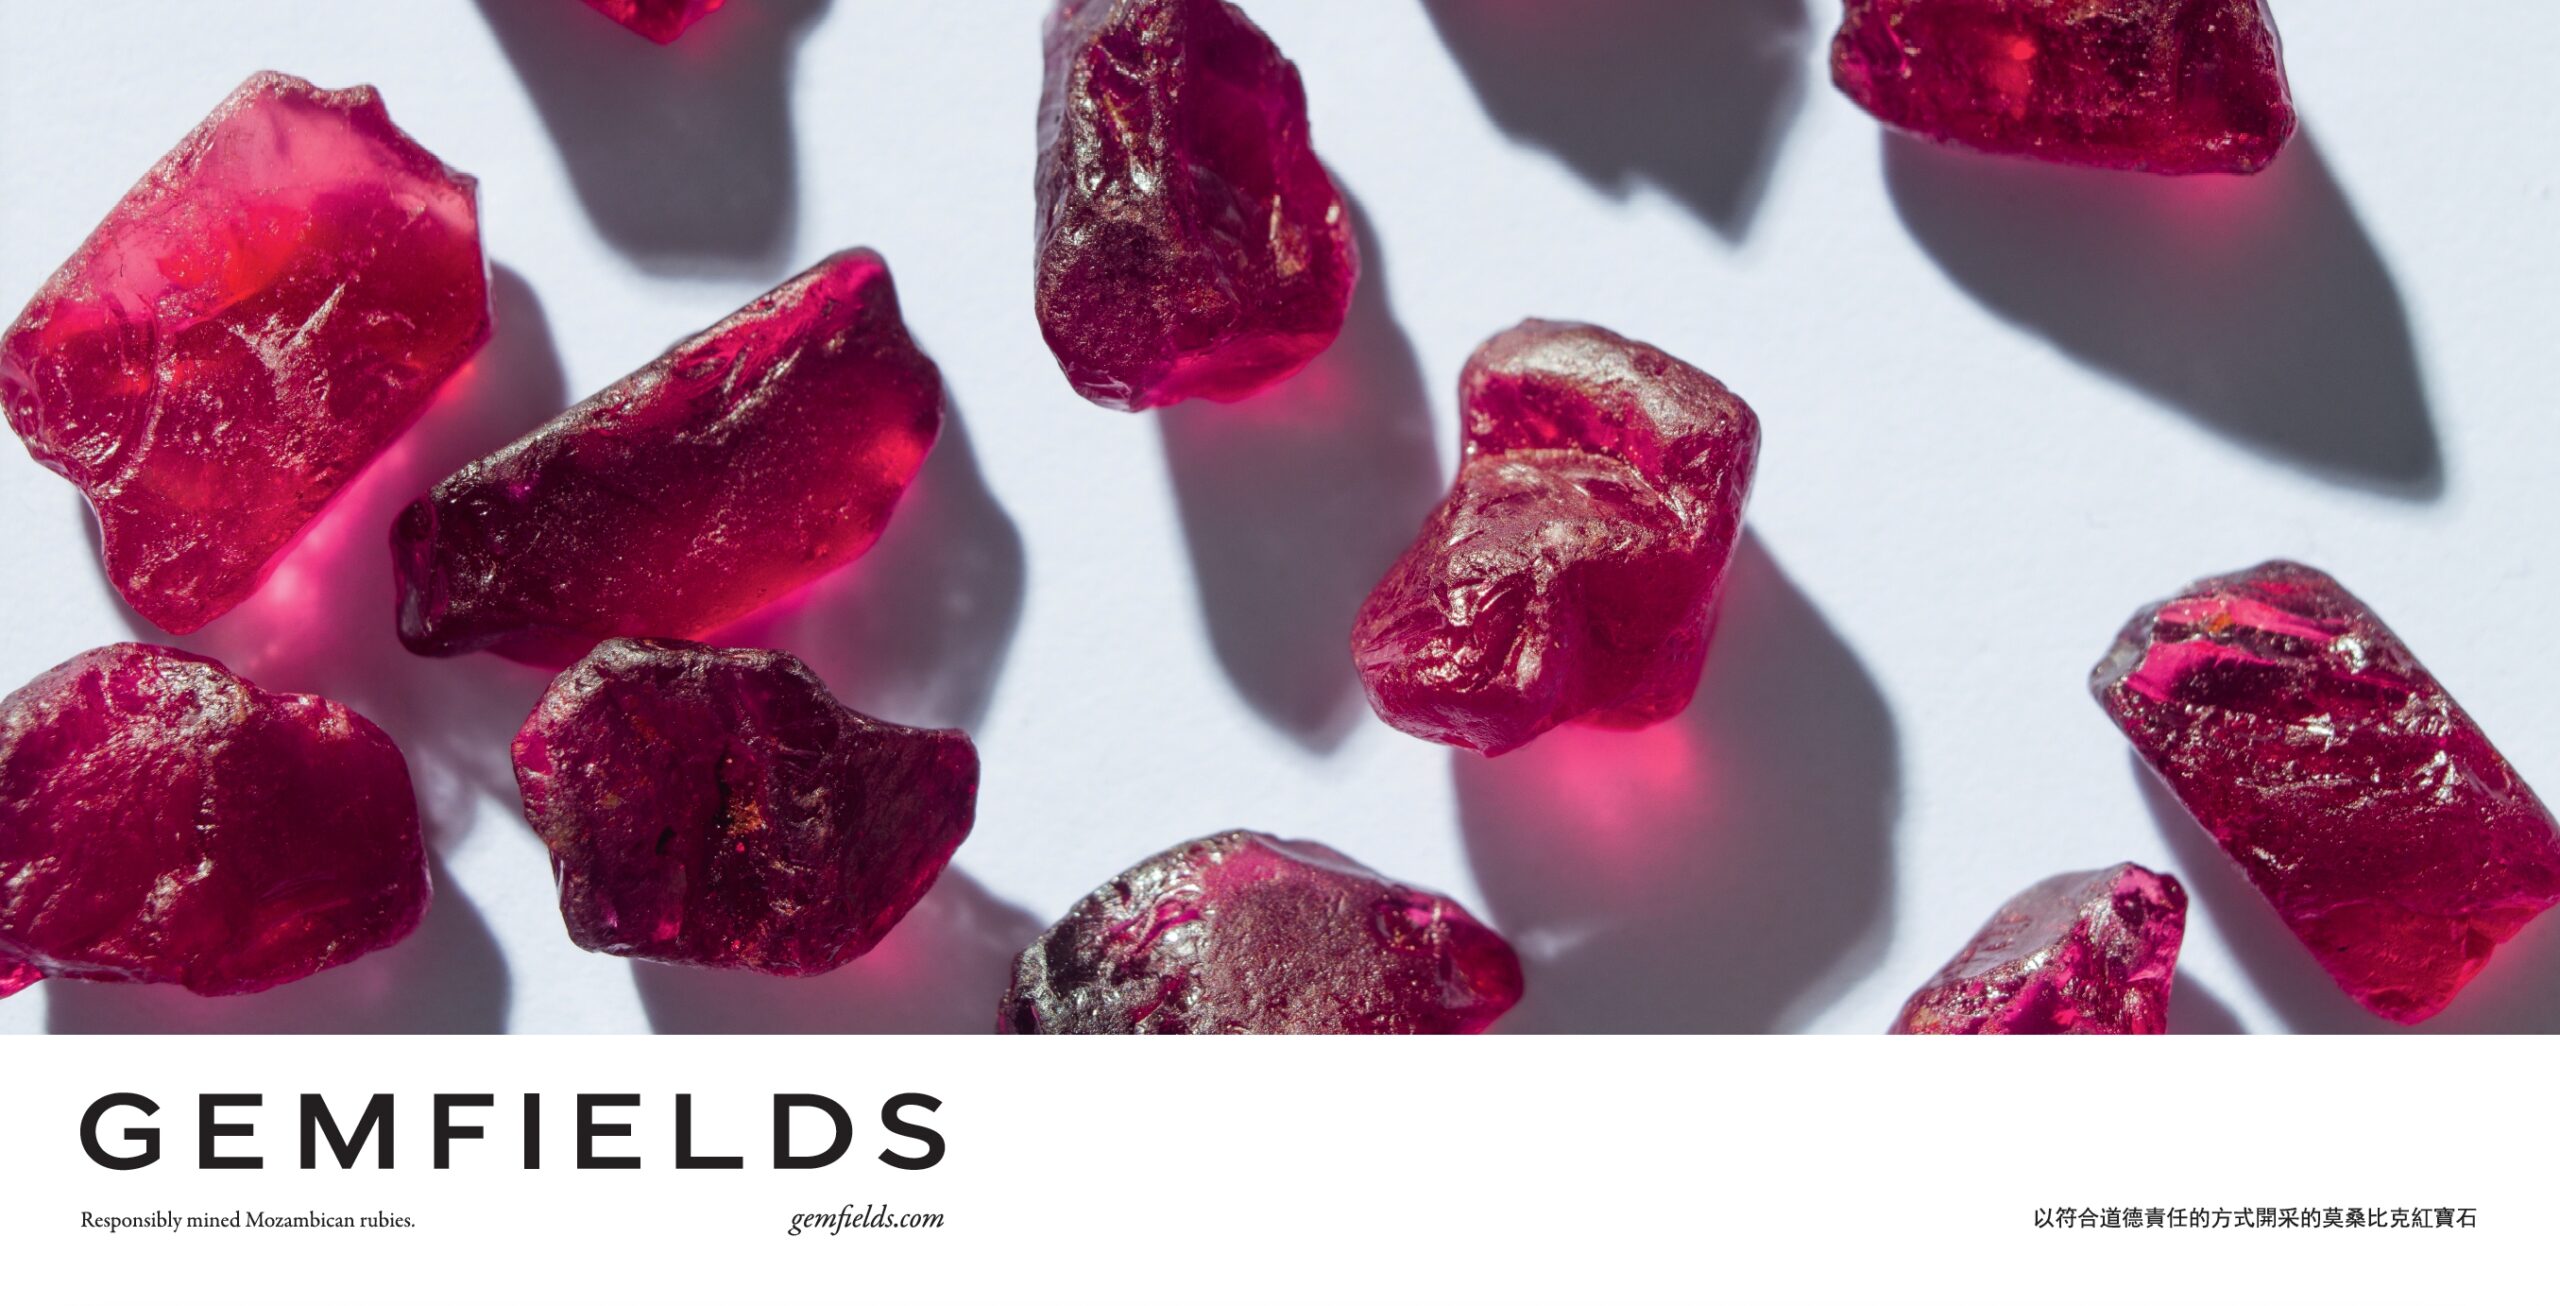 Tapestry-soho-frith-street-central-london-gemfields-mining-gemstones-jewels-spring-campaign-advertising-digital-press-reprographics-complete-production-services-getintouch-discover-rubies-getintouch